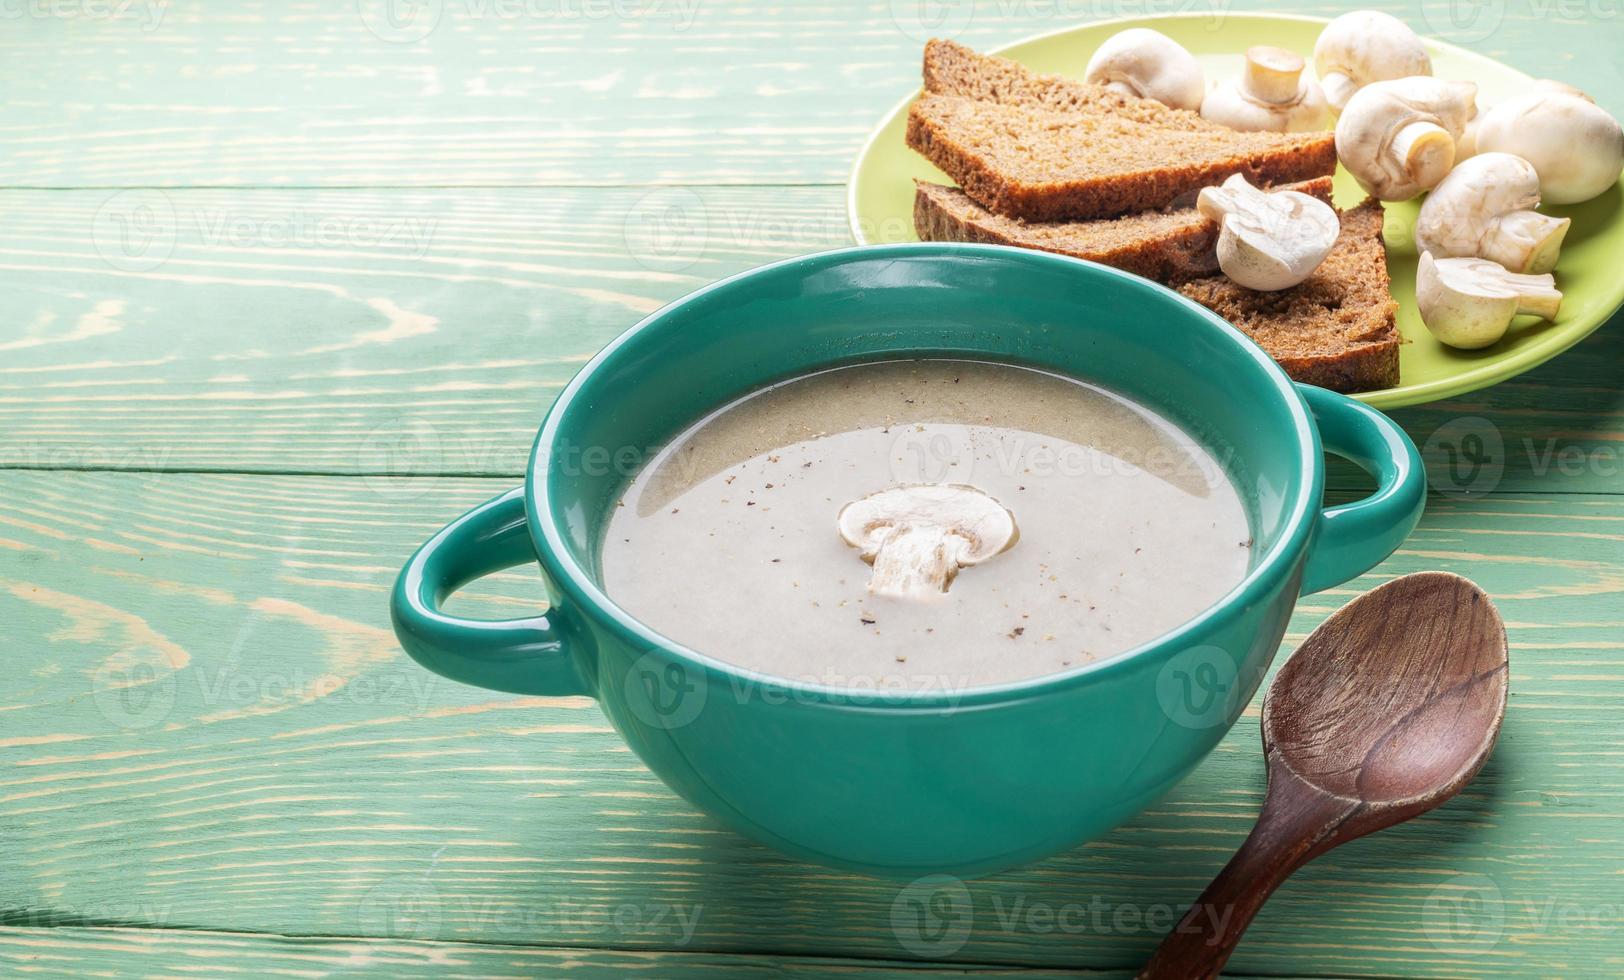 Turquoise ceramic bowl with mushroom cream soup, wooden spoon, garlic, bread, on green wooden background. photo